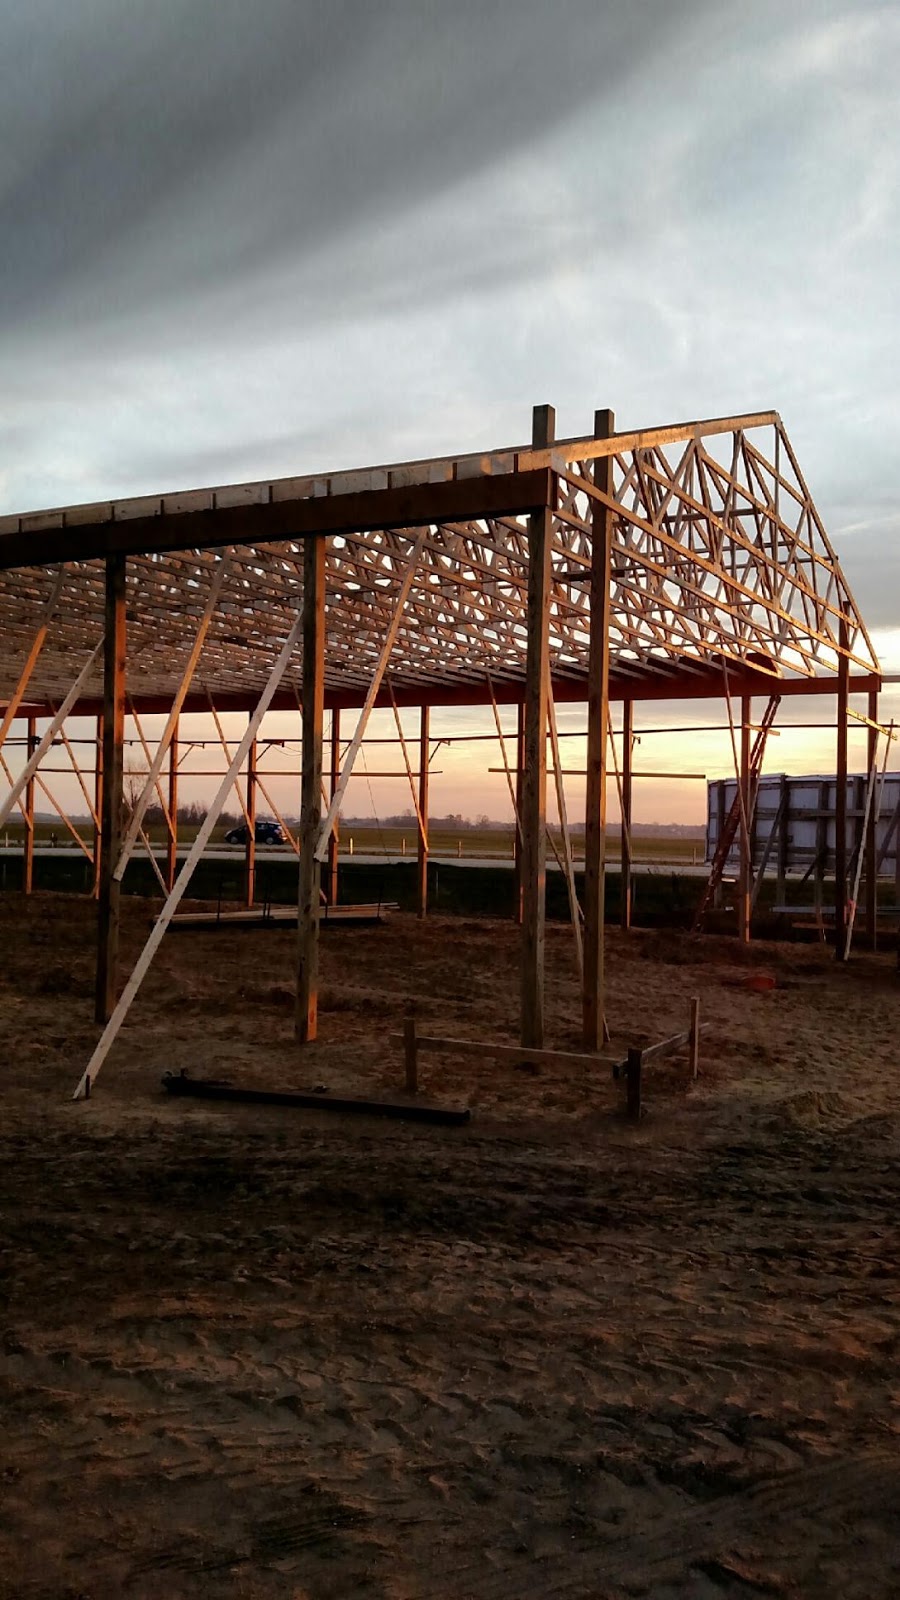 The trusses have been installed and secured on Alt Oil's new building in Coopersville, MI.